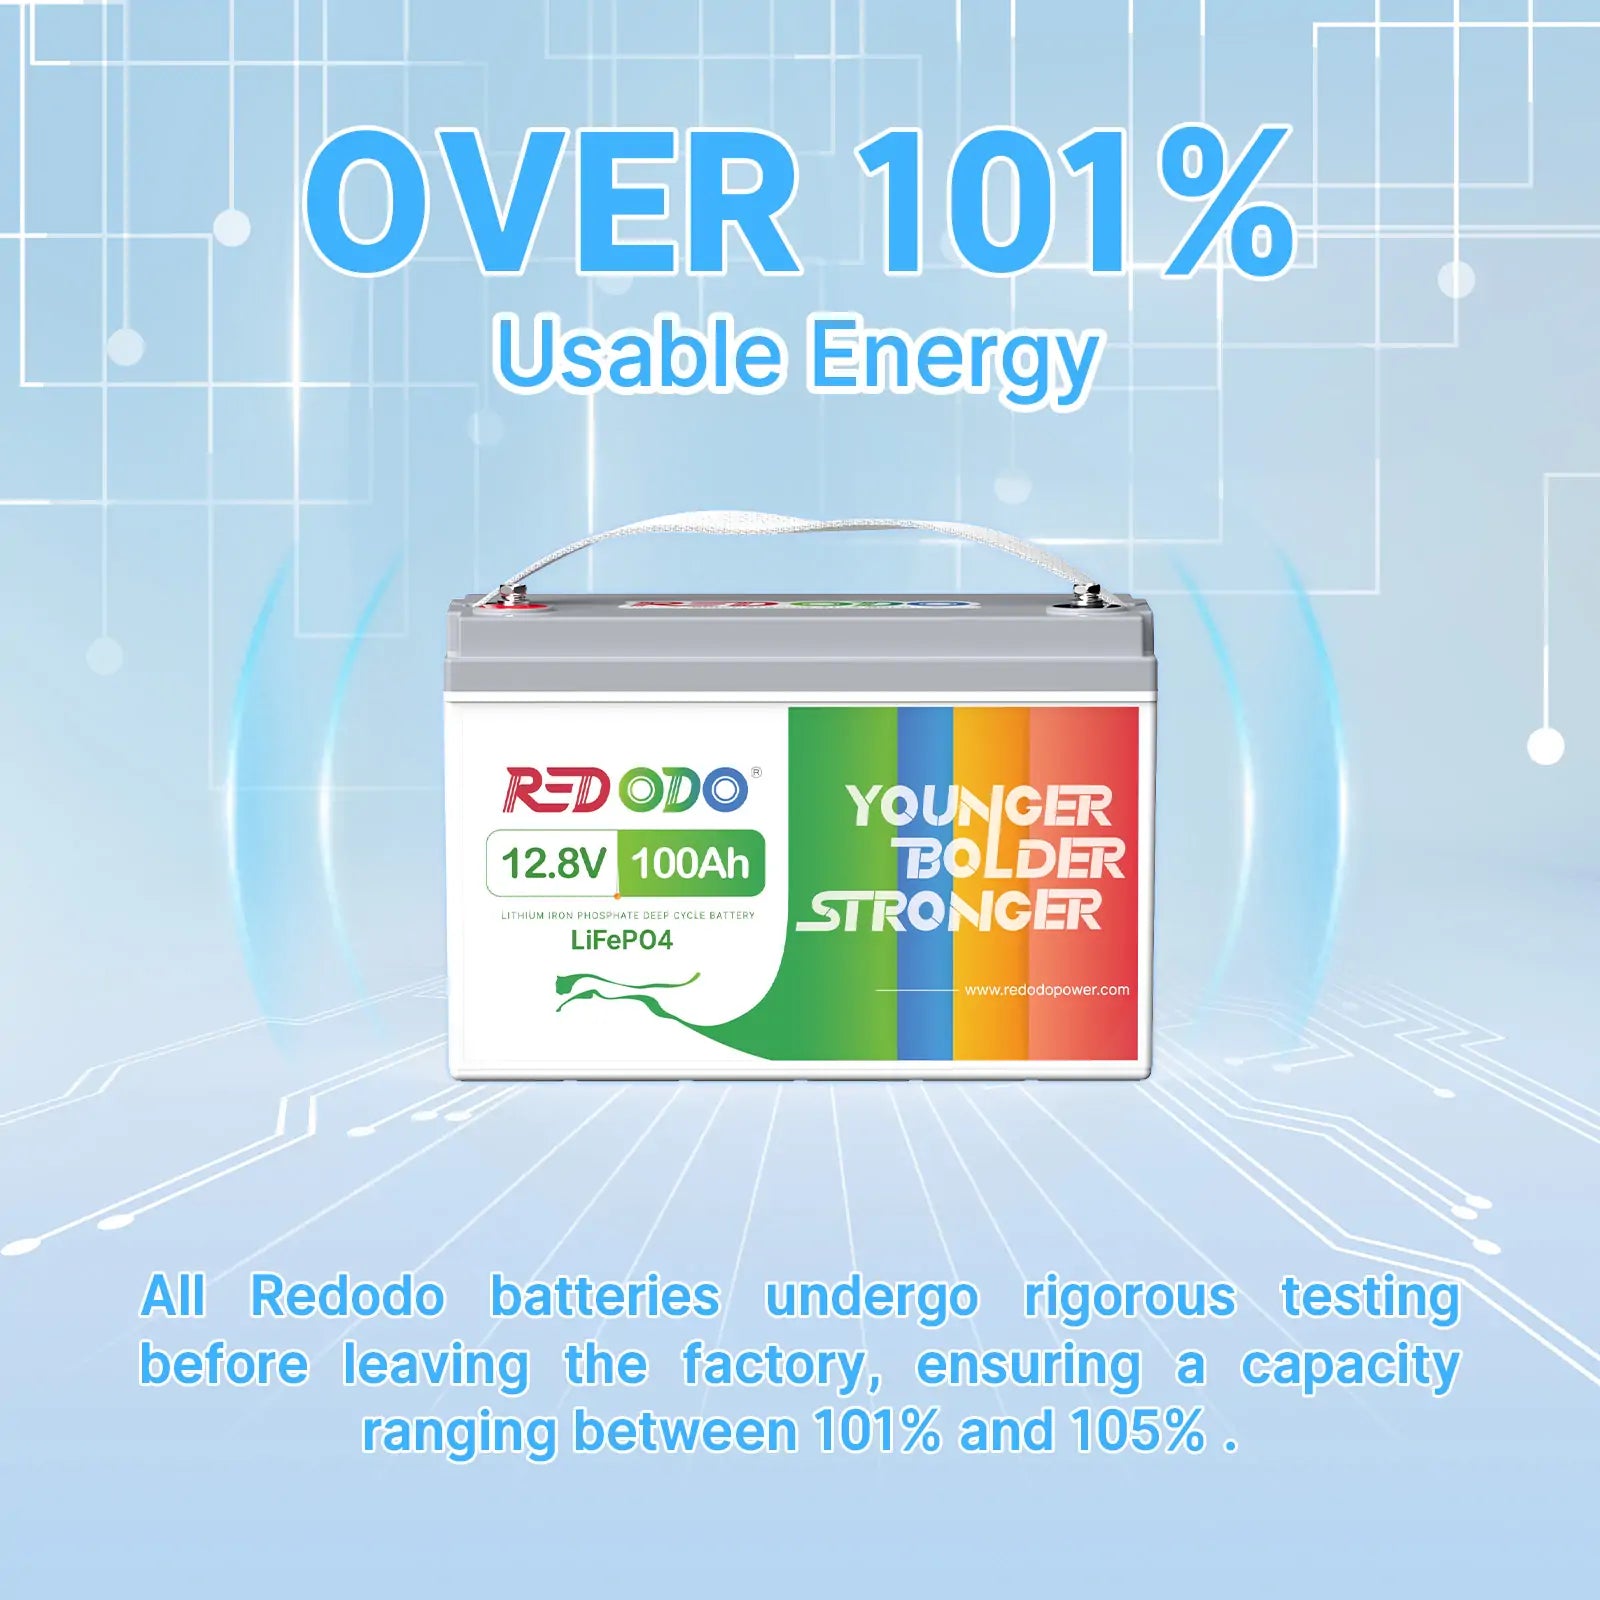 Redodo 12V 100Ah Lithium Battery with over 101% usable energy